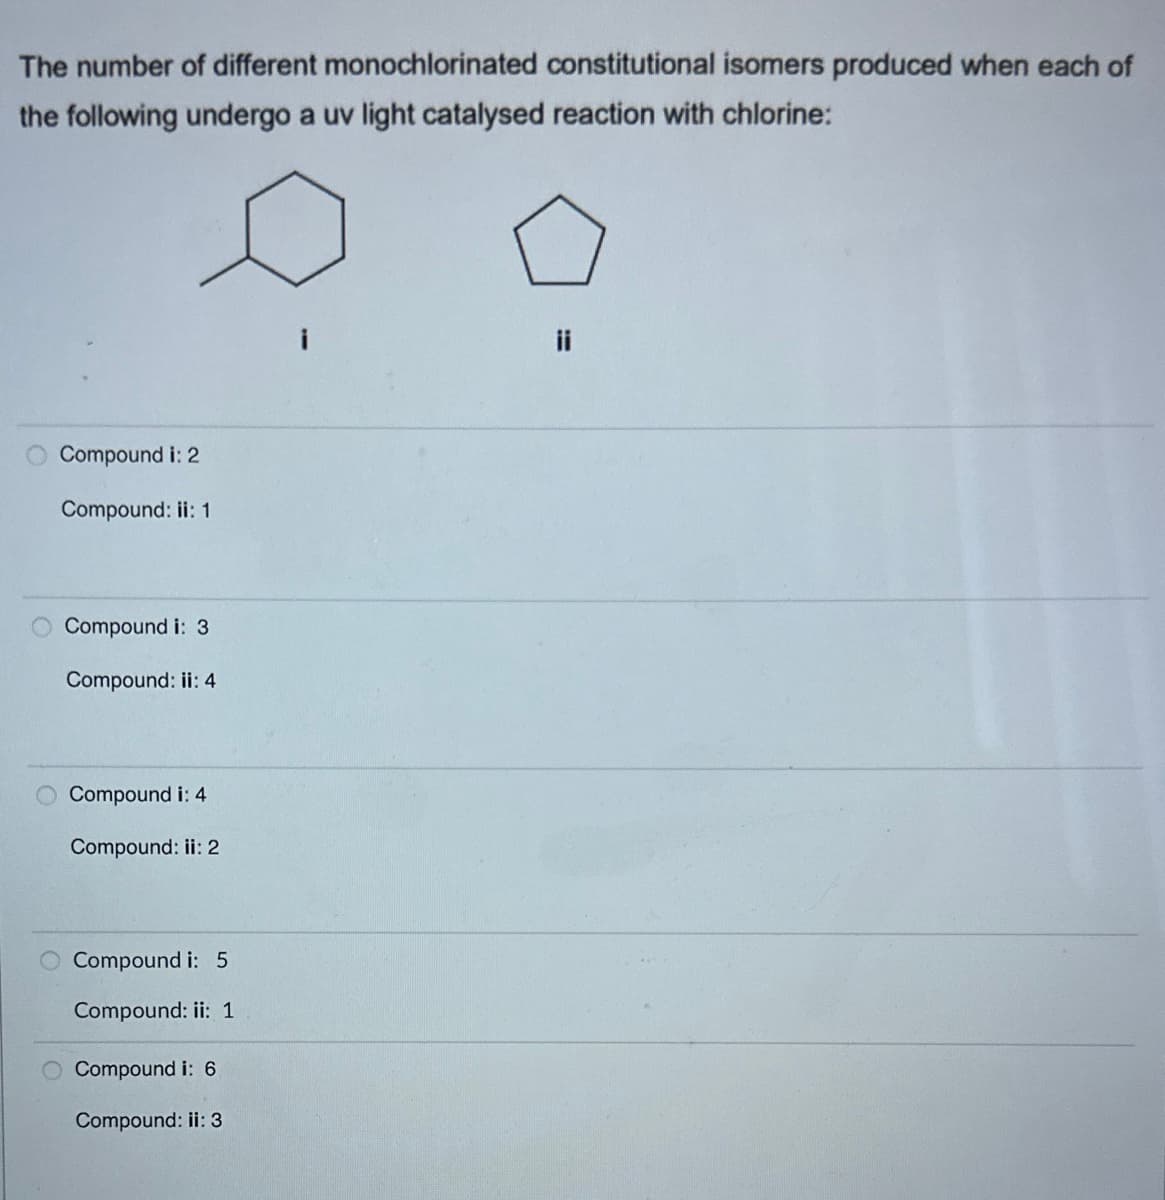 The number of different monochlorinated constitutional isomers produced when each of
the following undergo a uv light catalysed reaction with chlorine:
Compound i: 2
Compound: ii: 1
Compound i: 3
Compound: ii: 4
Compound i: 4
Compound: ii: 2
Compound i: 5
Compound: ii: 1
Compound i: 6
Compound: ii: 3